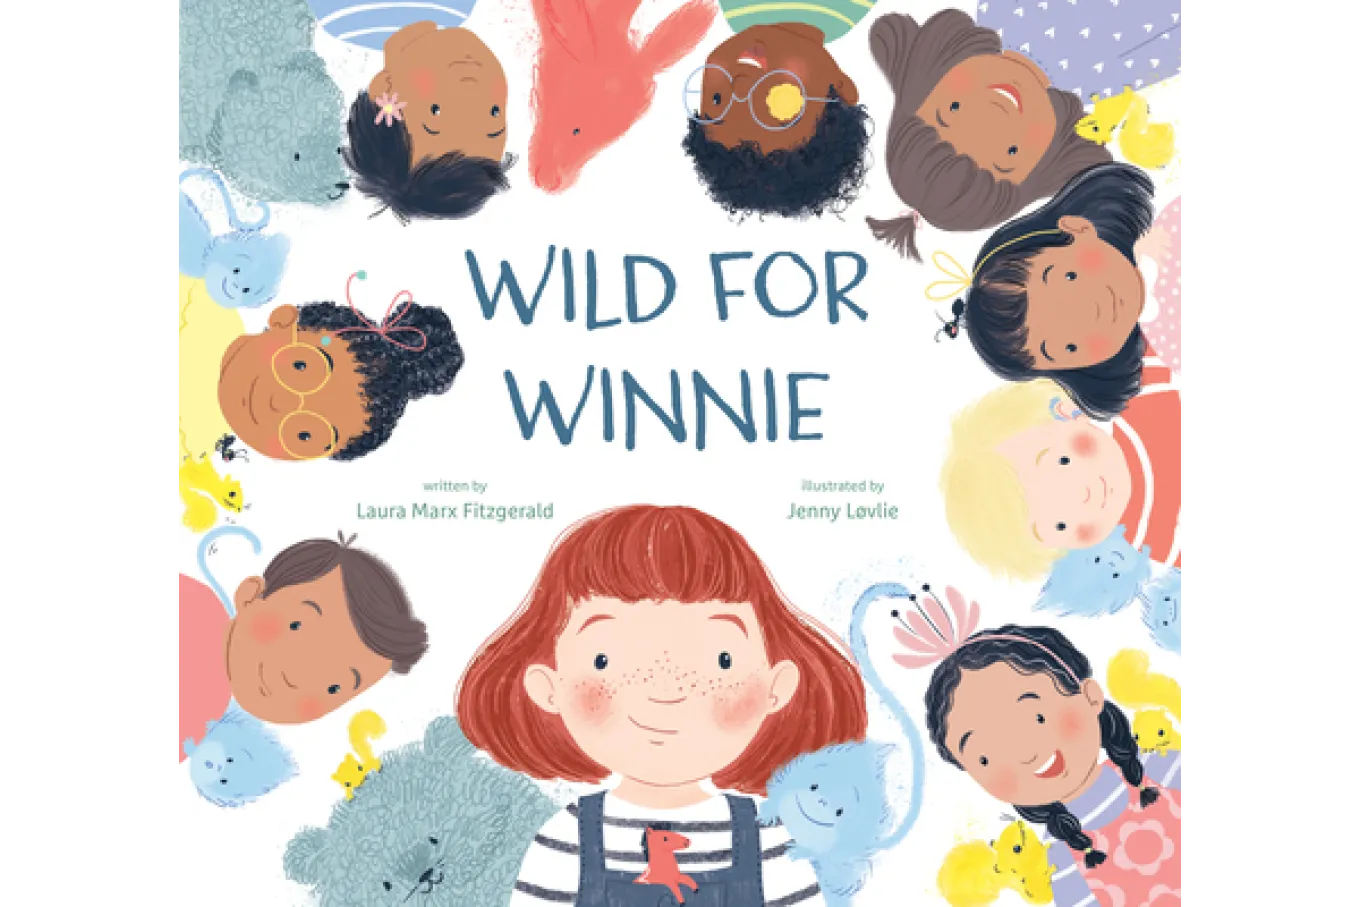 Cover of Wild for Winnie